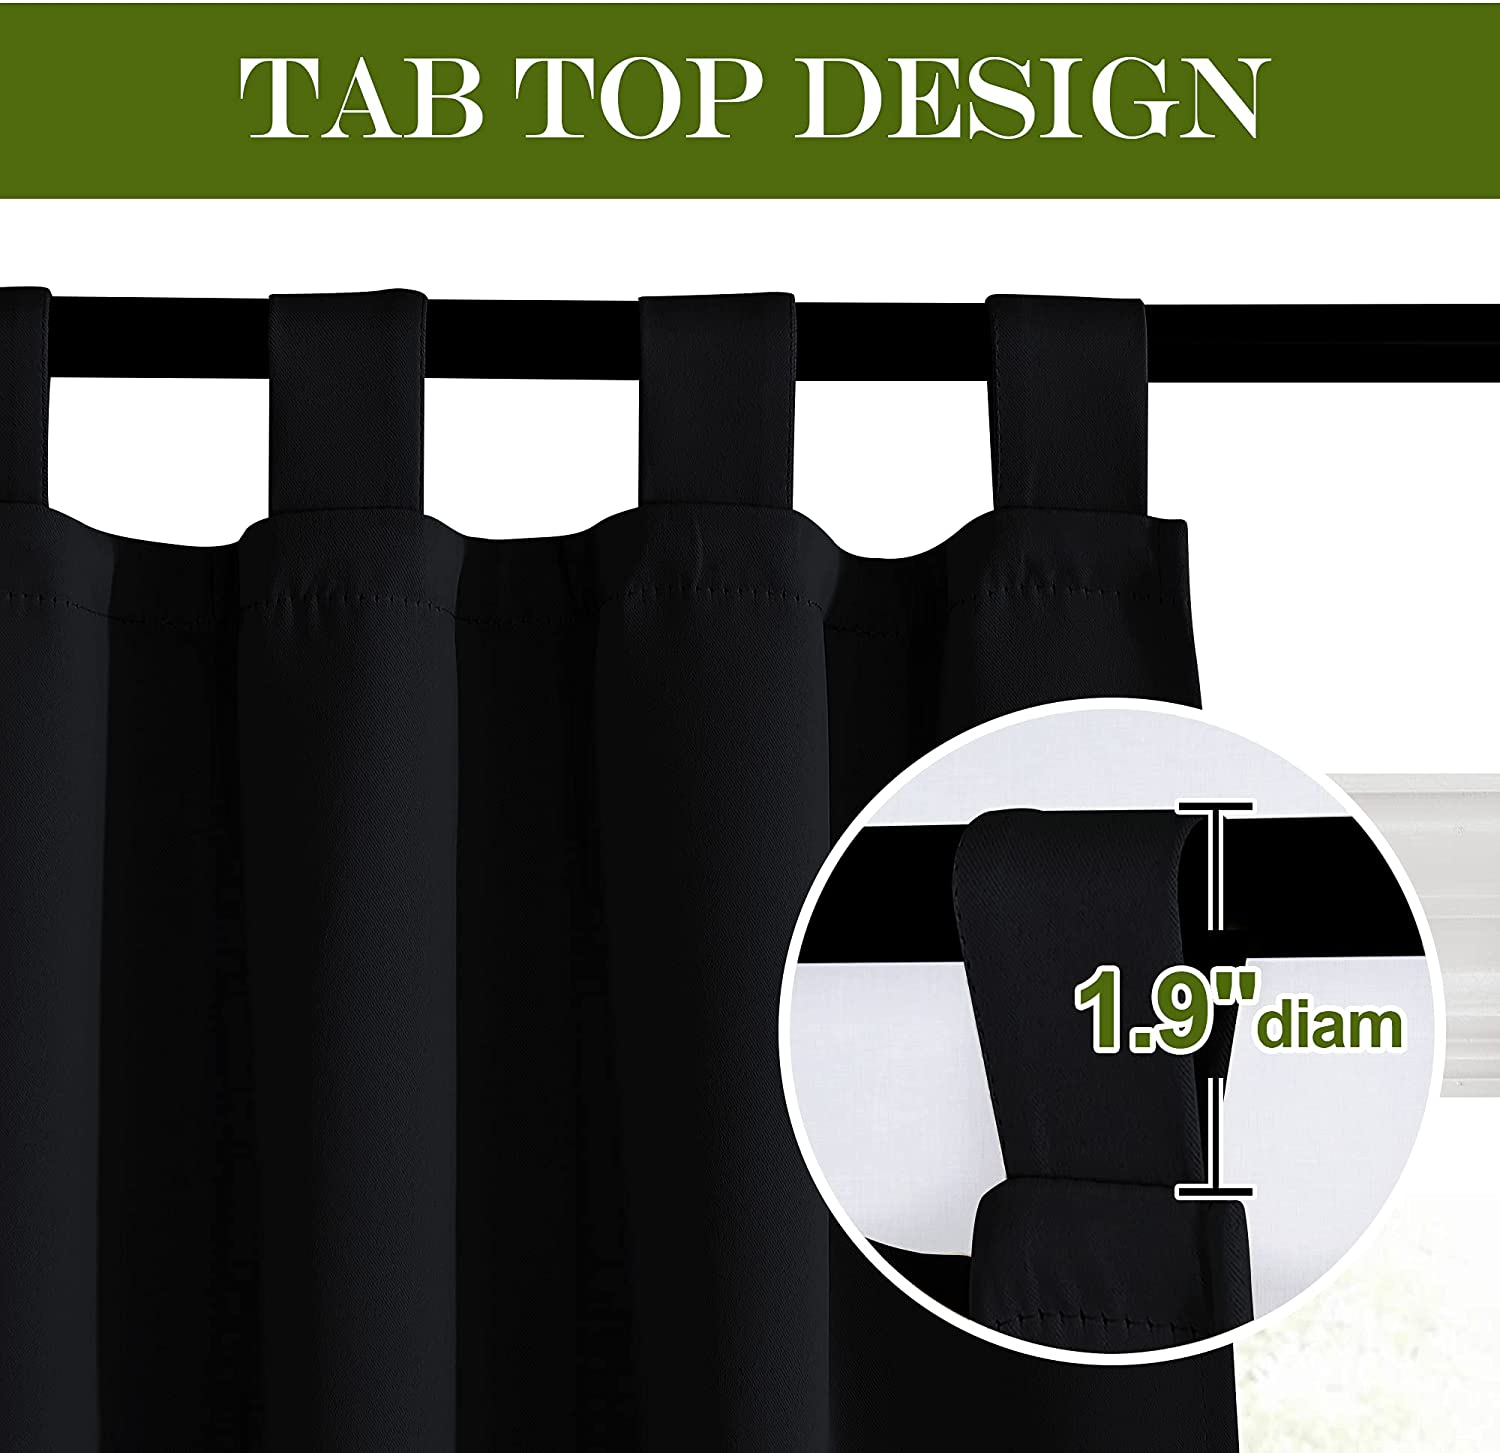 Tab Top Thermal Insulated Blackout Curtains For Living Roomand Bedroom 2 Panels KGORGE Store